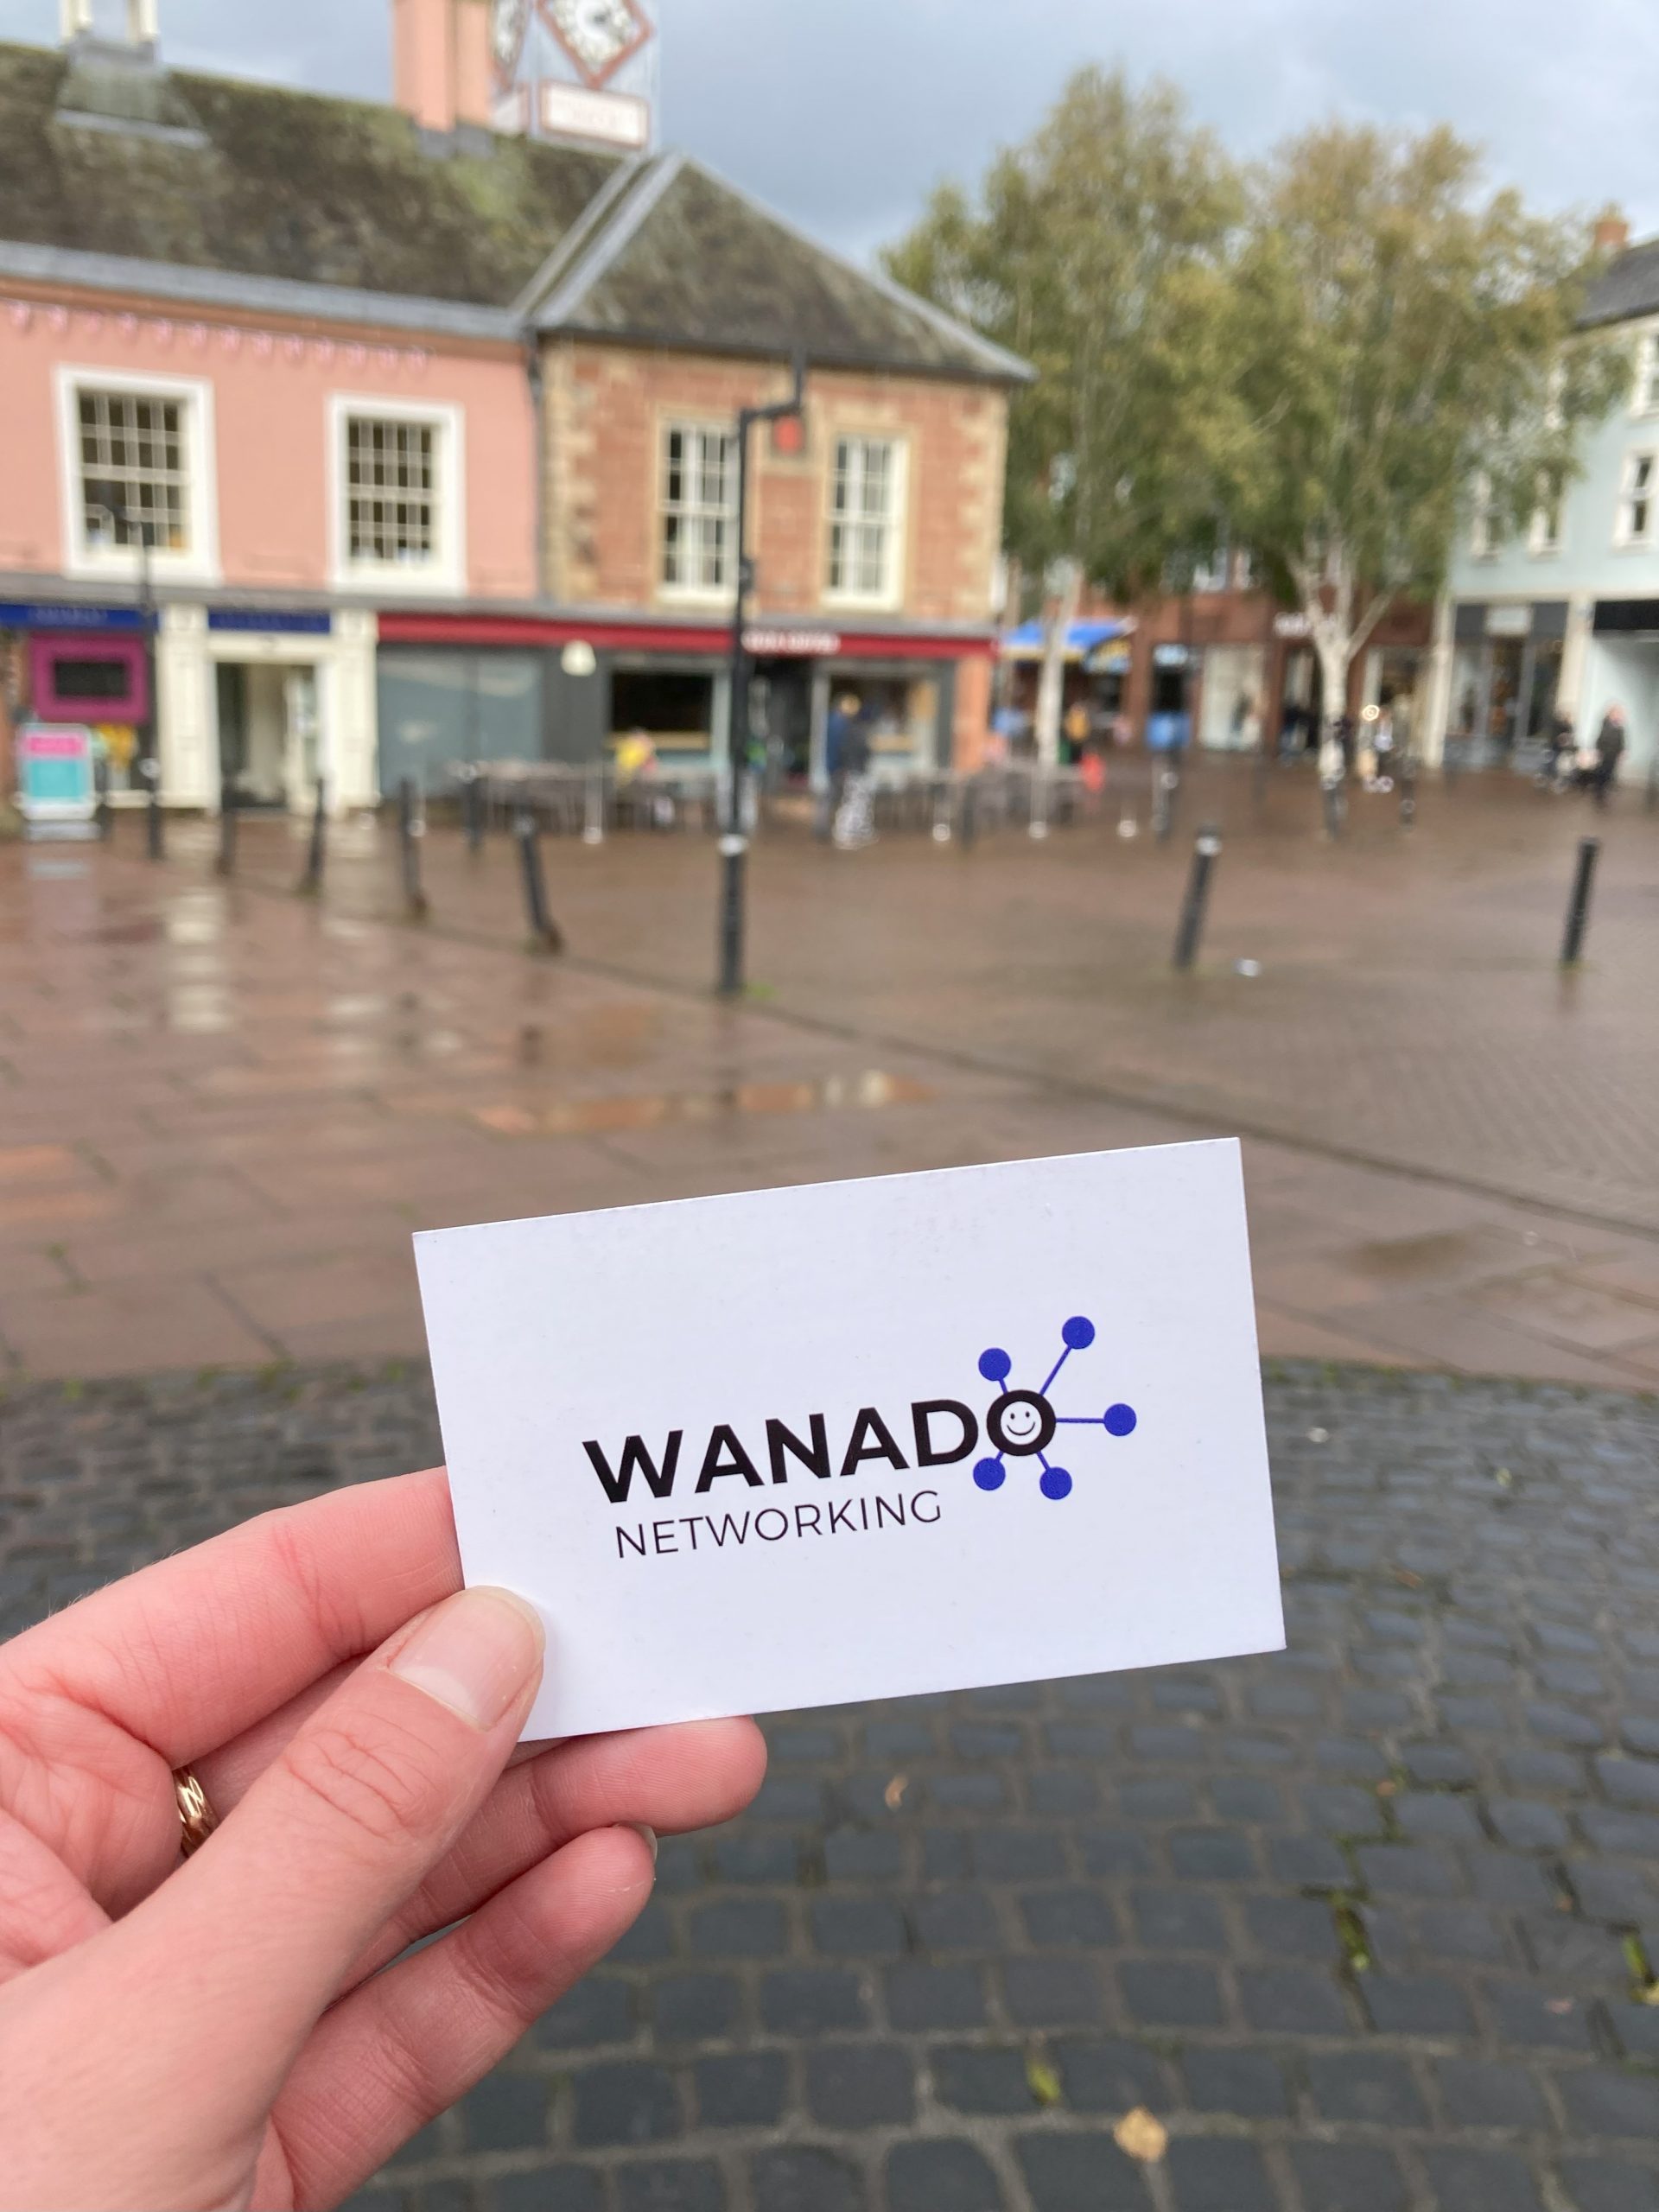 Wanado Networking business card held in Carlisle city centre